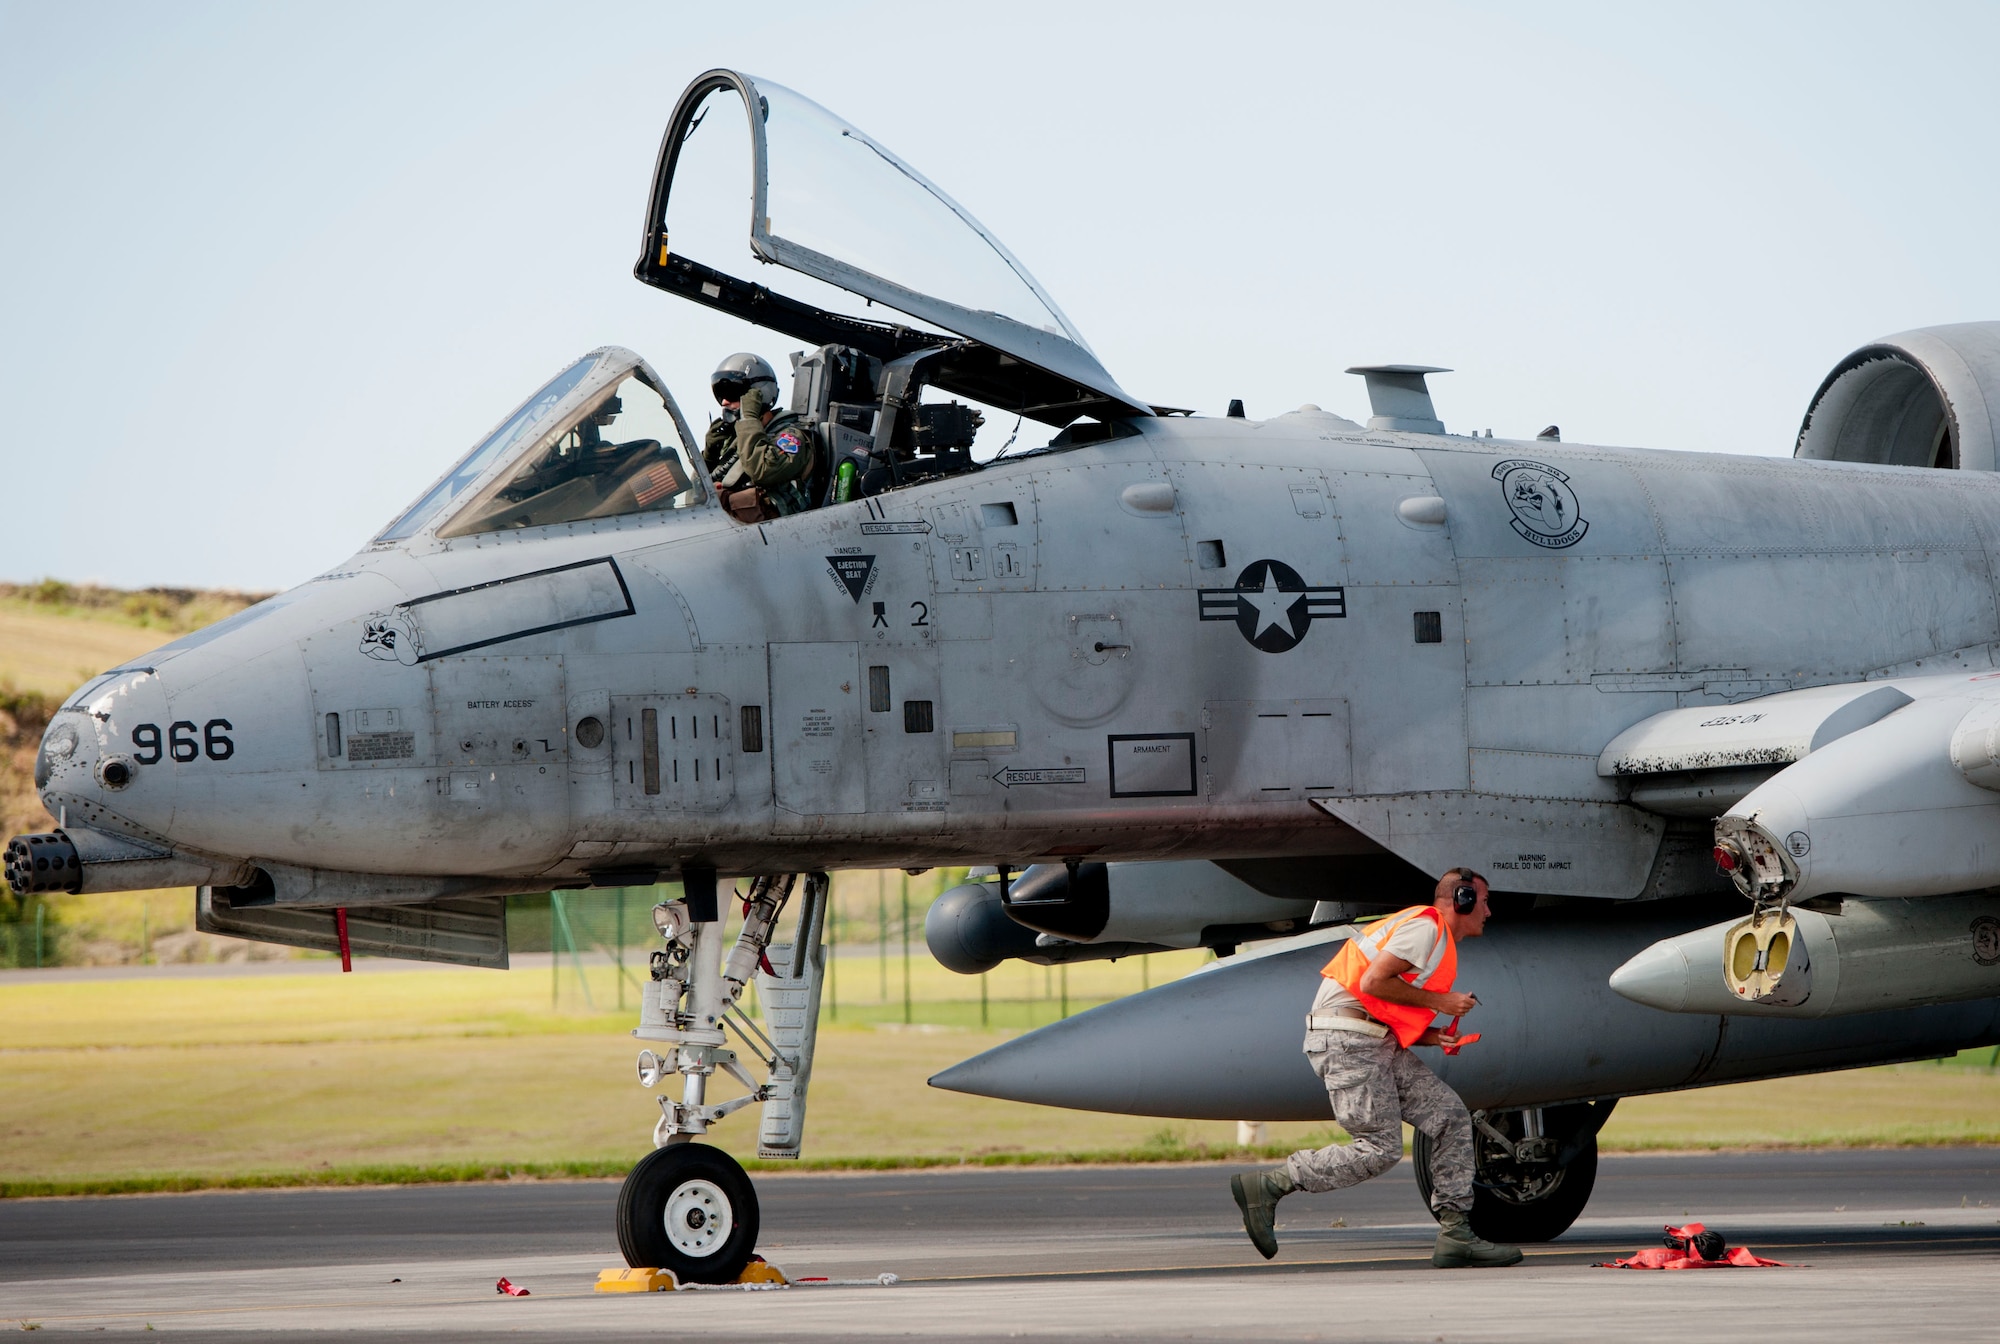 Staff Sgt. Nicholas Podvasnik, a 65th Operations Support Squadron transient alert maintenance technician, and Capt. Justin Ledvina, a 354th Expeditionary Fighter Squadron A-10 Thunderbolt II pilot, perform shutdown procedures on Lajes Field, Azores, Portugal, August 1, 2015. The 354th Expeditionary Fighter Squadron returns home after deploying 12 A-10s as part of a Theater Security Package in support of Operation Atlantic Resolve, to Spangdahlem AB, Germany where they conducted training alongside our NATO allies to strengthen interoperability and to demonstrate U.S. commitment to the security and stability of Europe. (U.S. Air Force photo by Master Sgt. Bradley C. Church).